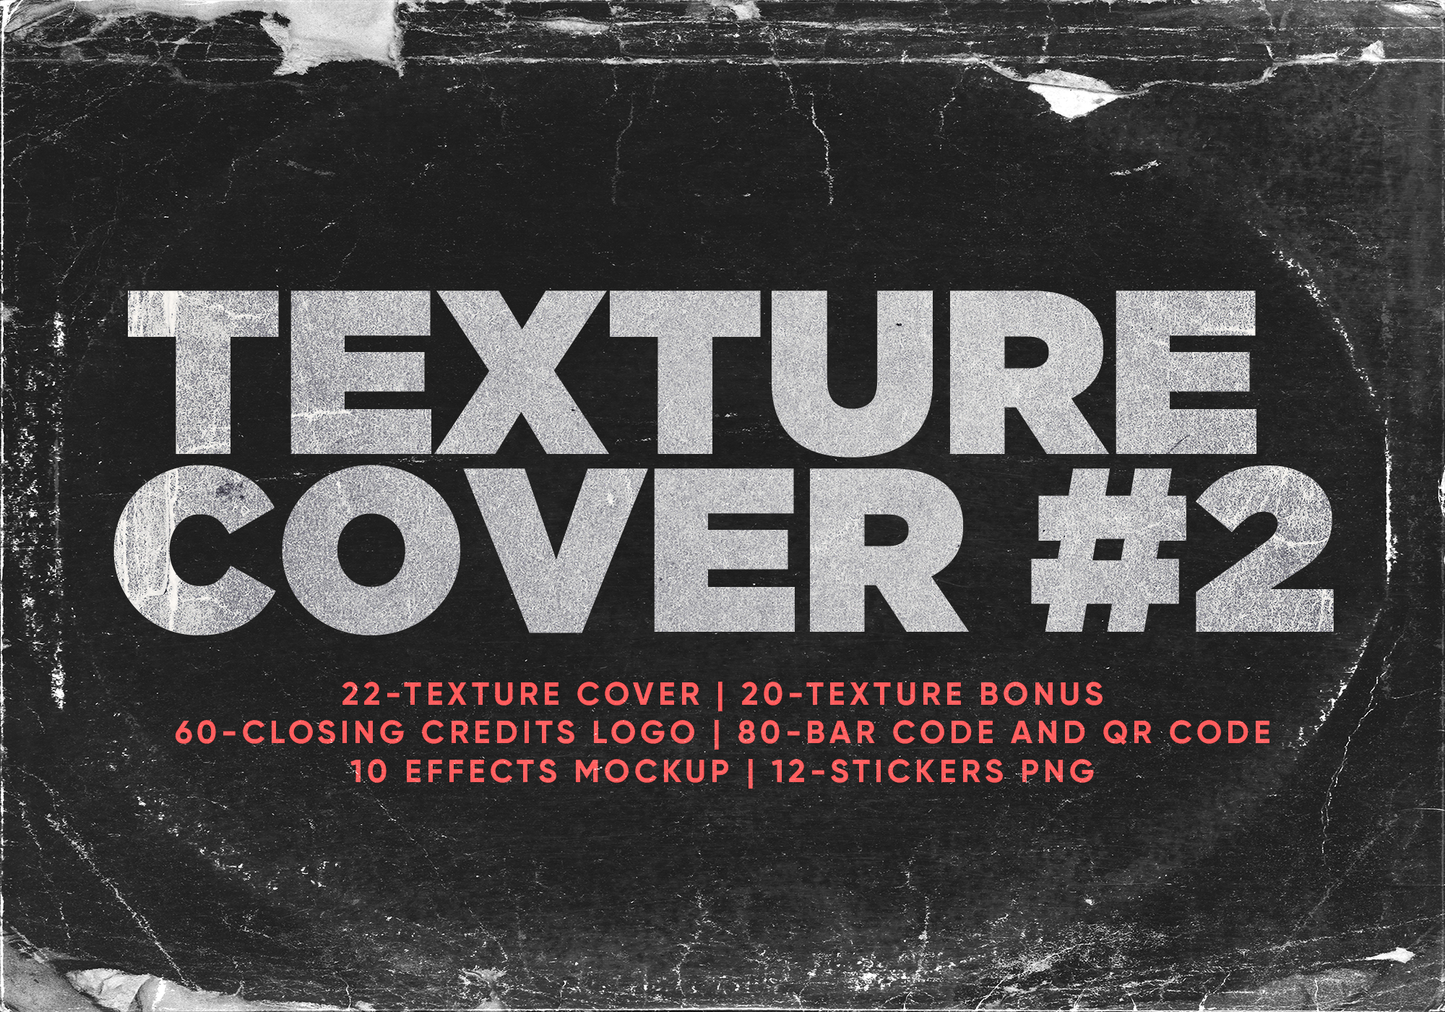 Texture Cover #2